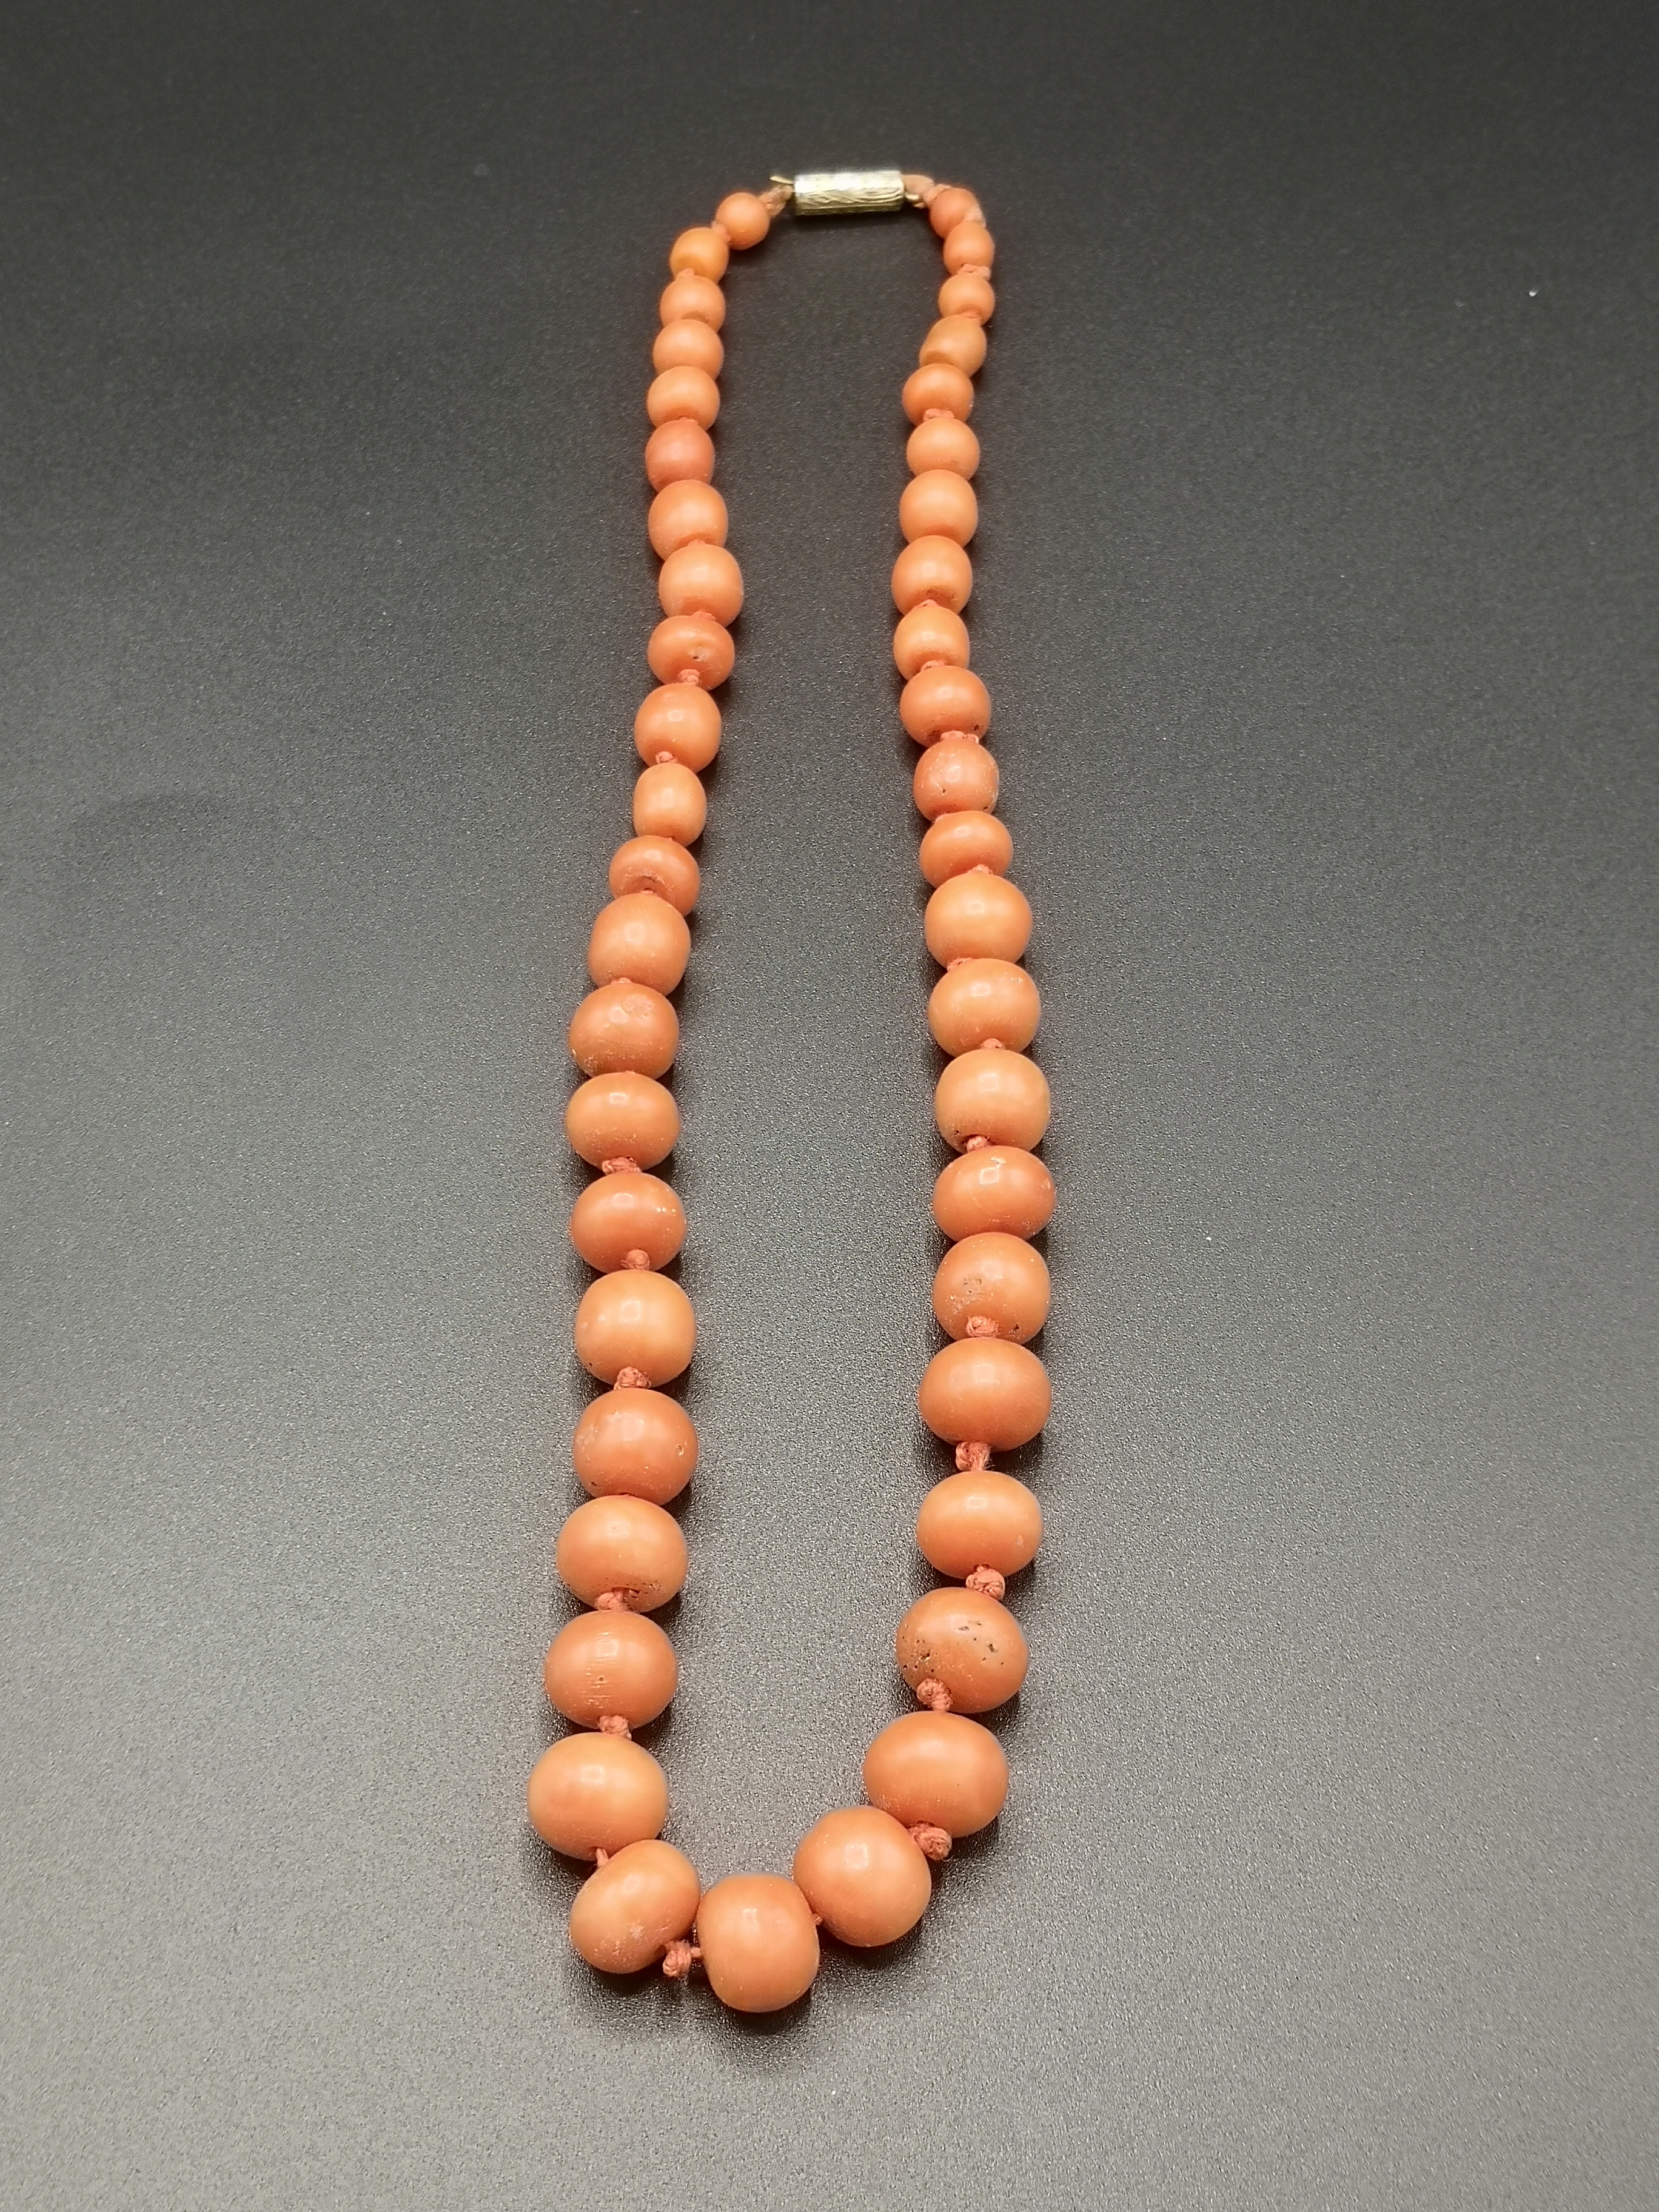 Coral graduated bead necklace - Image 2 of 5